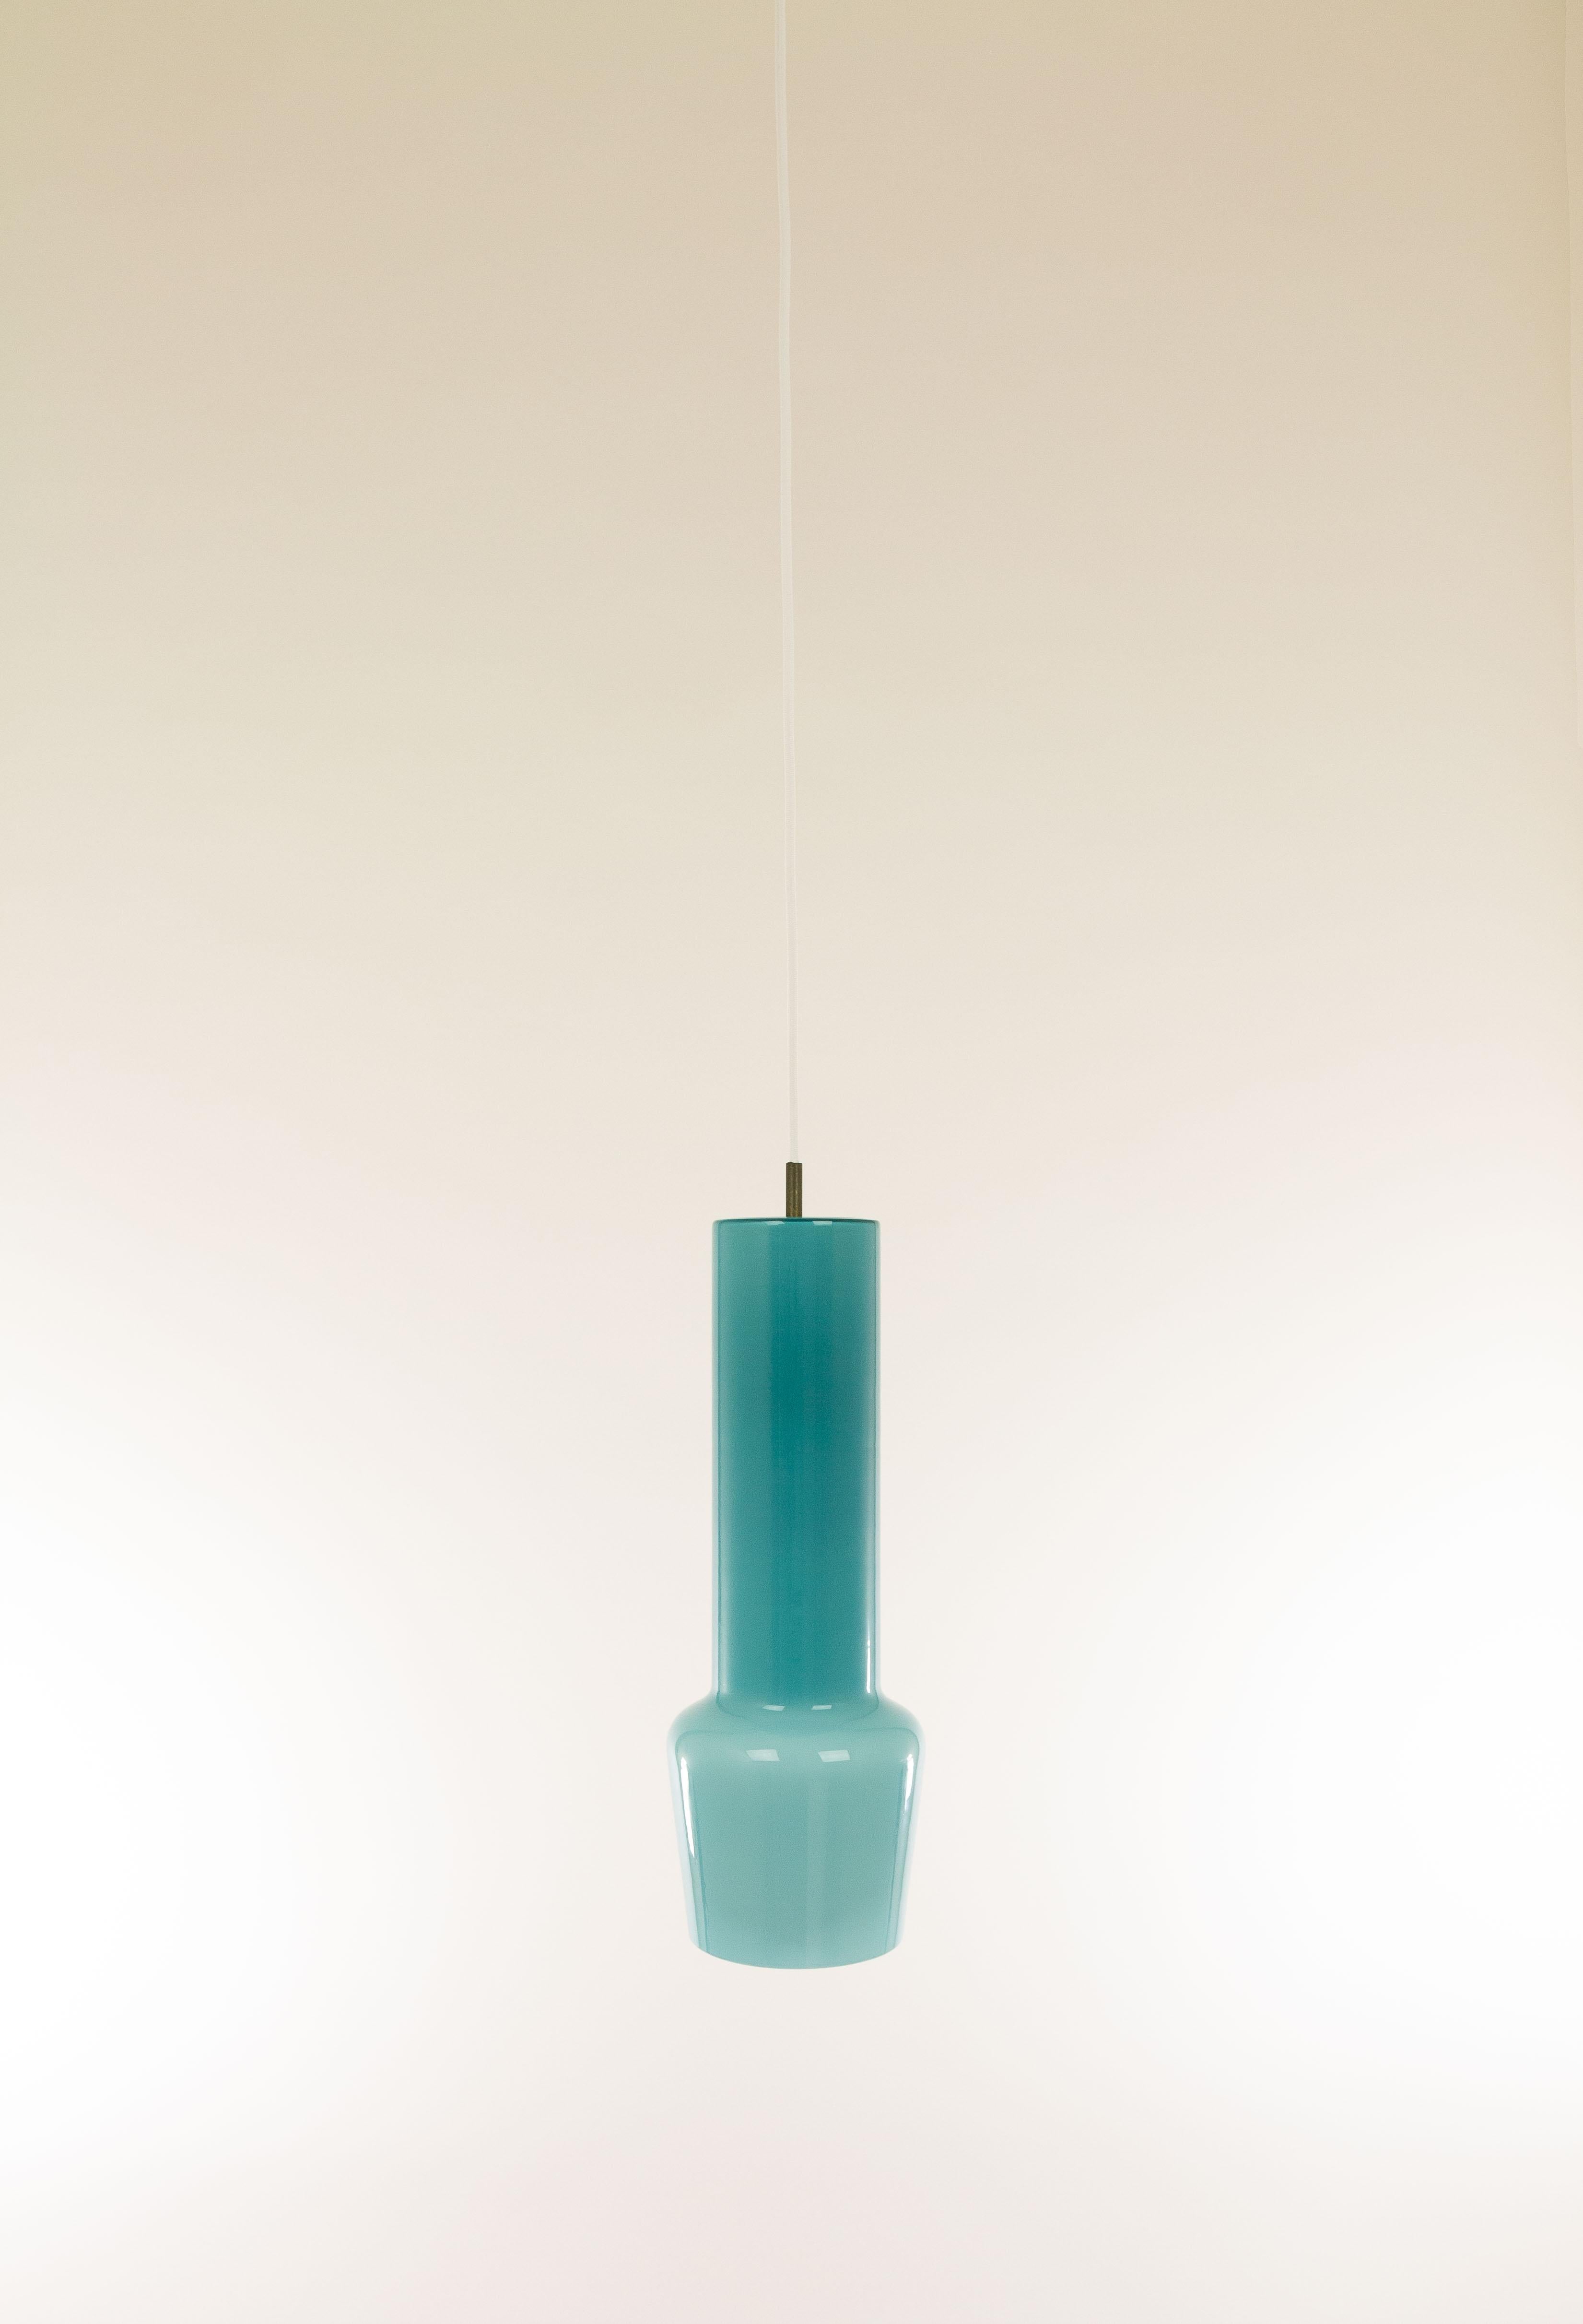 Mid-Century Modern Turquoise Glass Pendant by Massimo Vignelli for Venini, 1950s